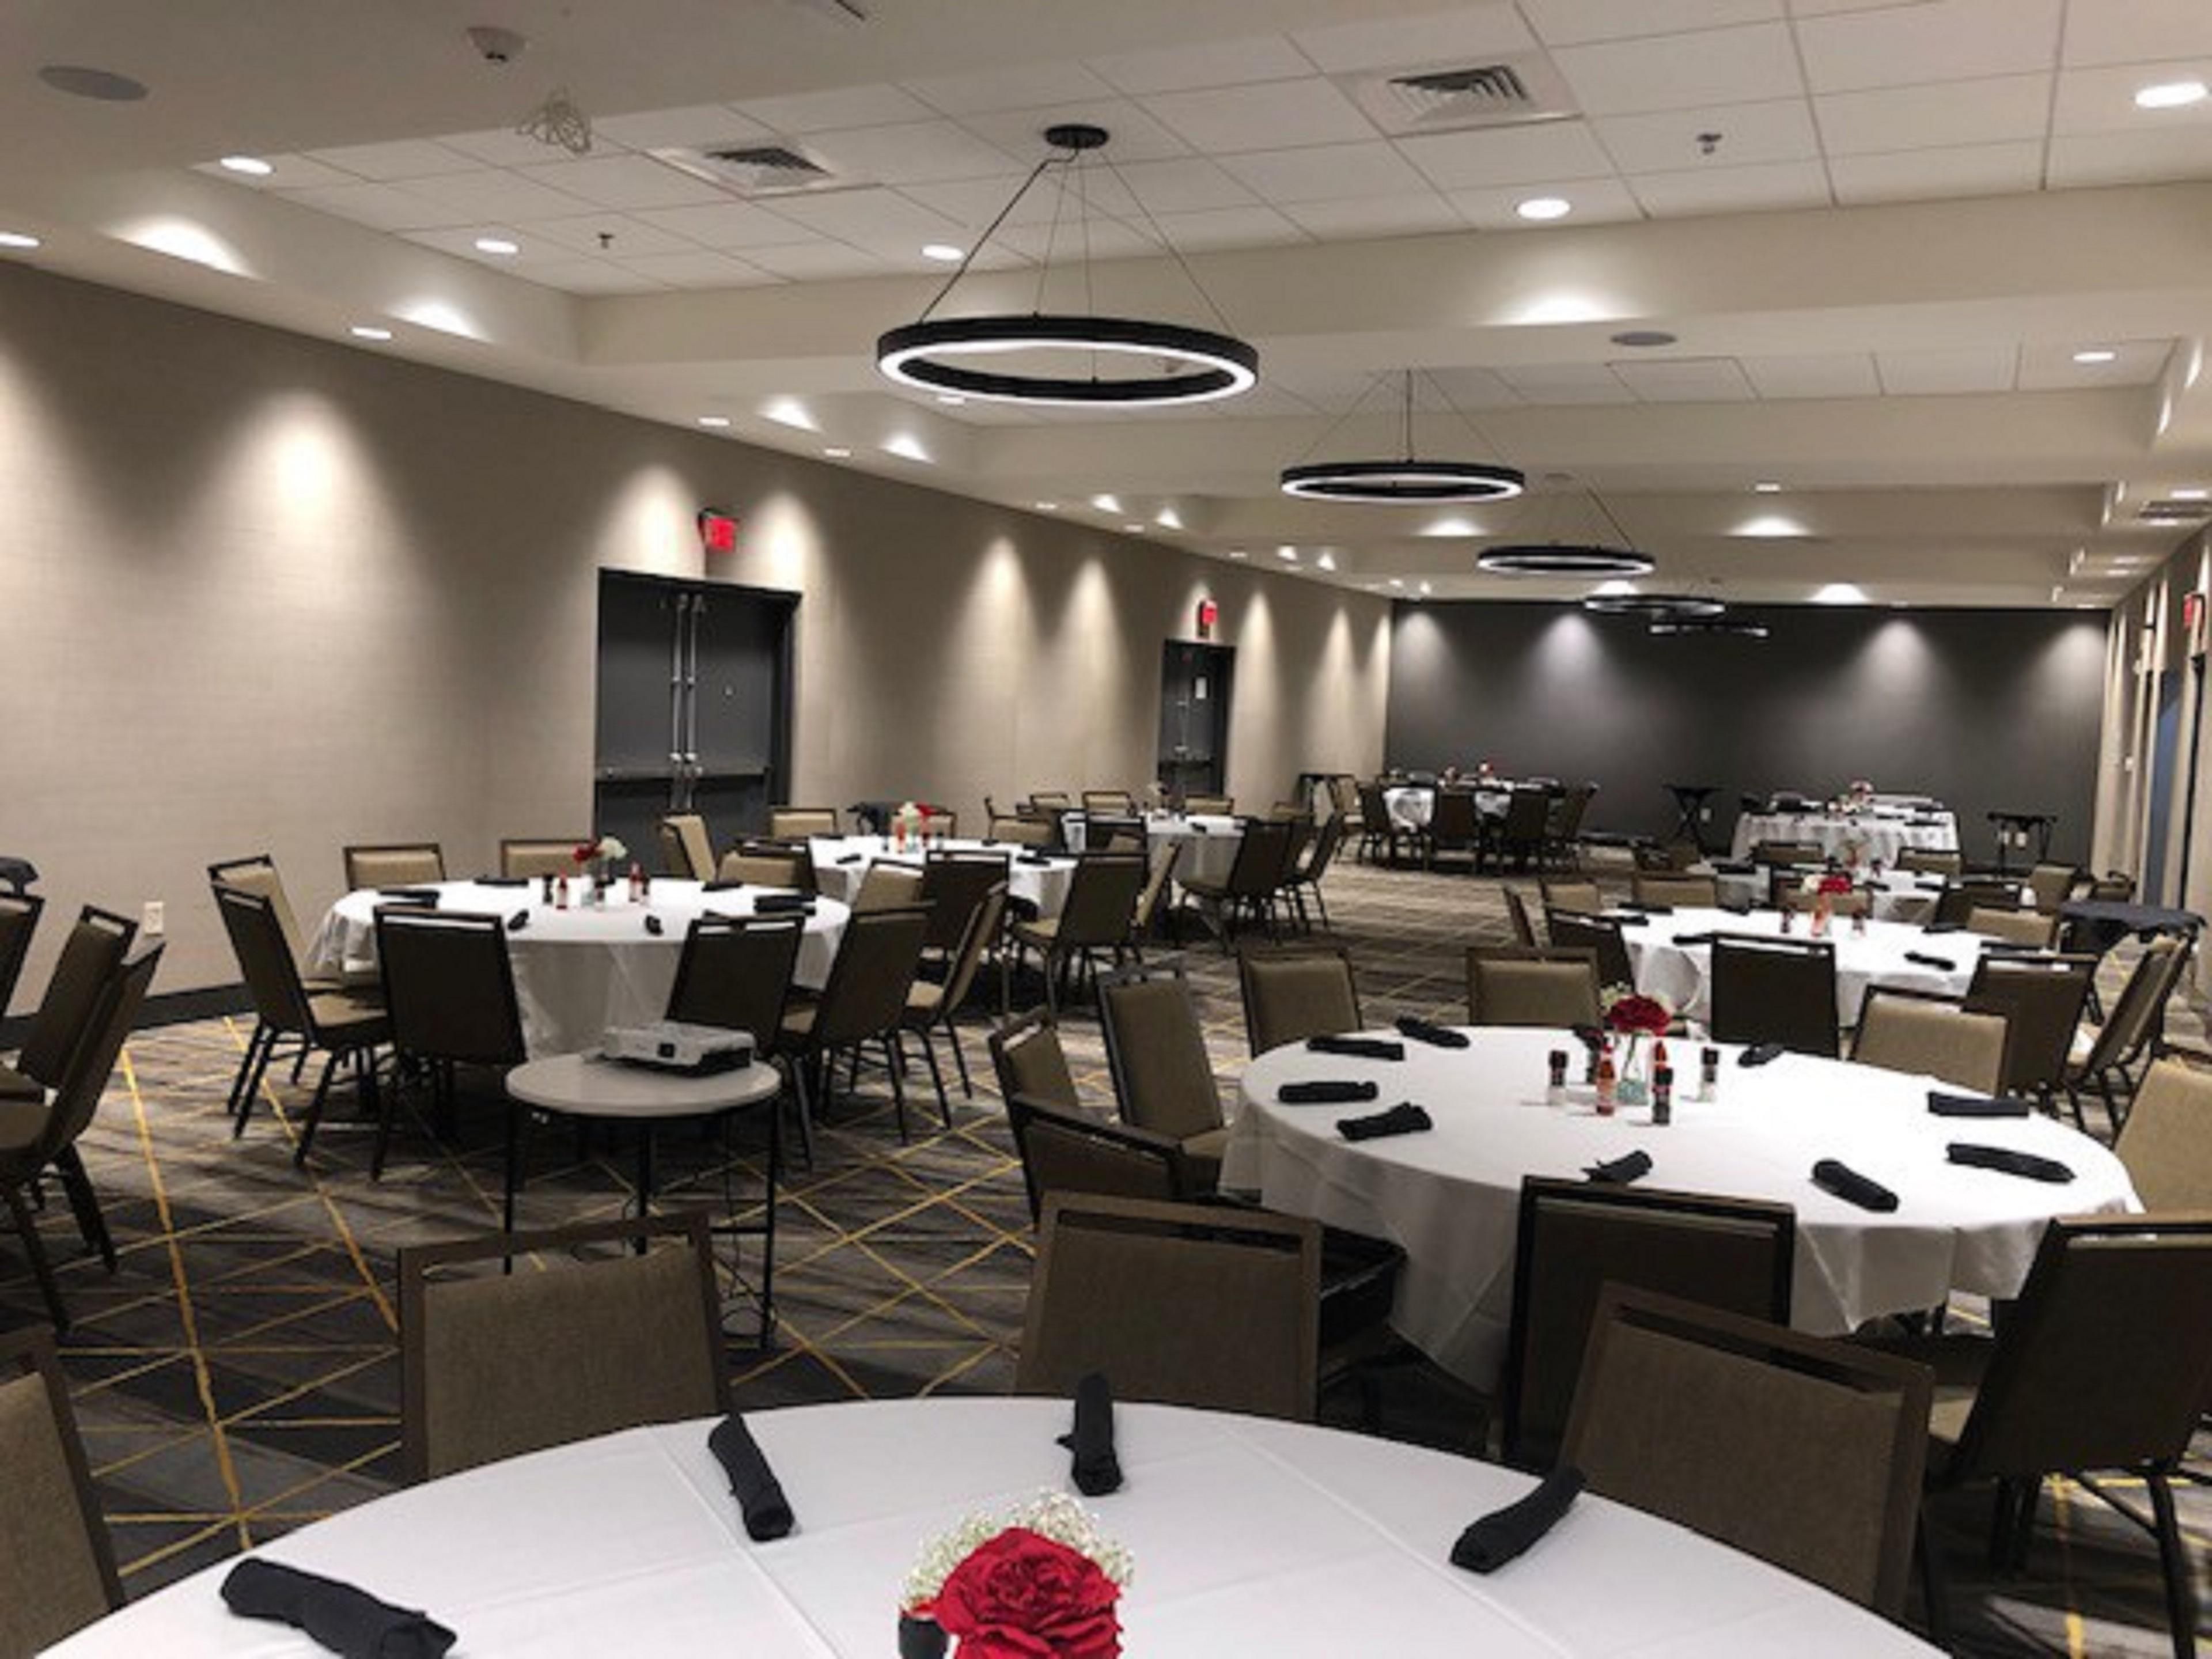 With over 2000 sq. ft. in meeting space, let our hotel host your special day. Follow the link below for a personalized quote.
